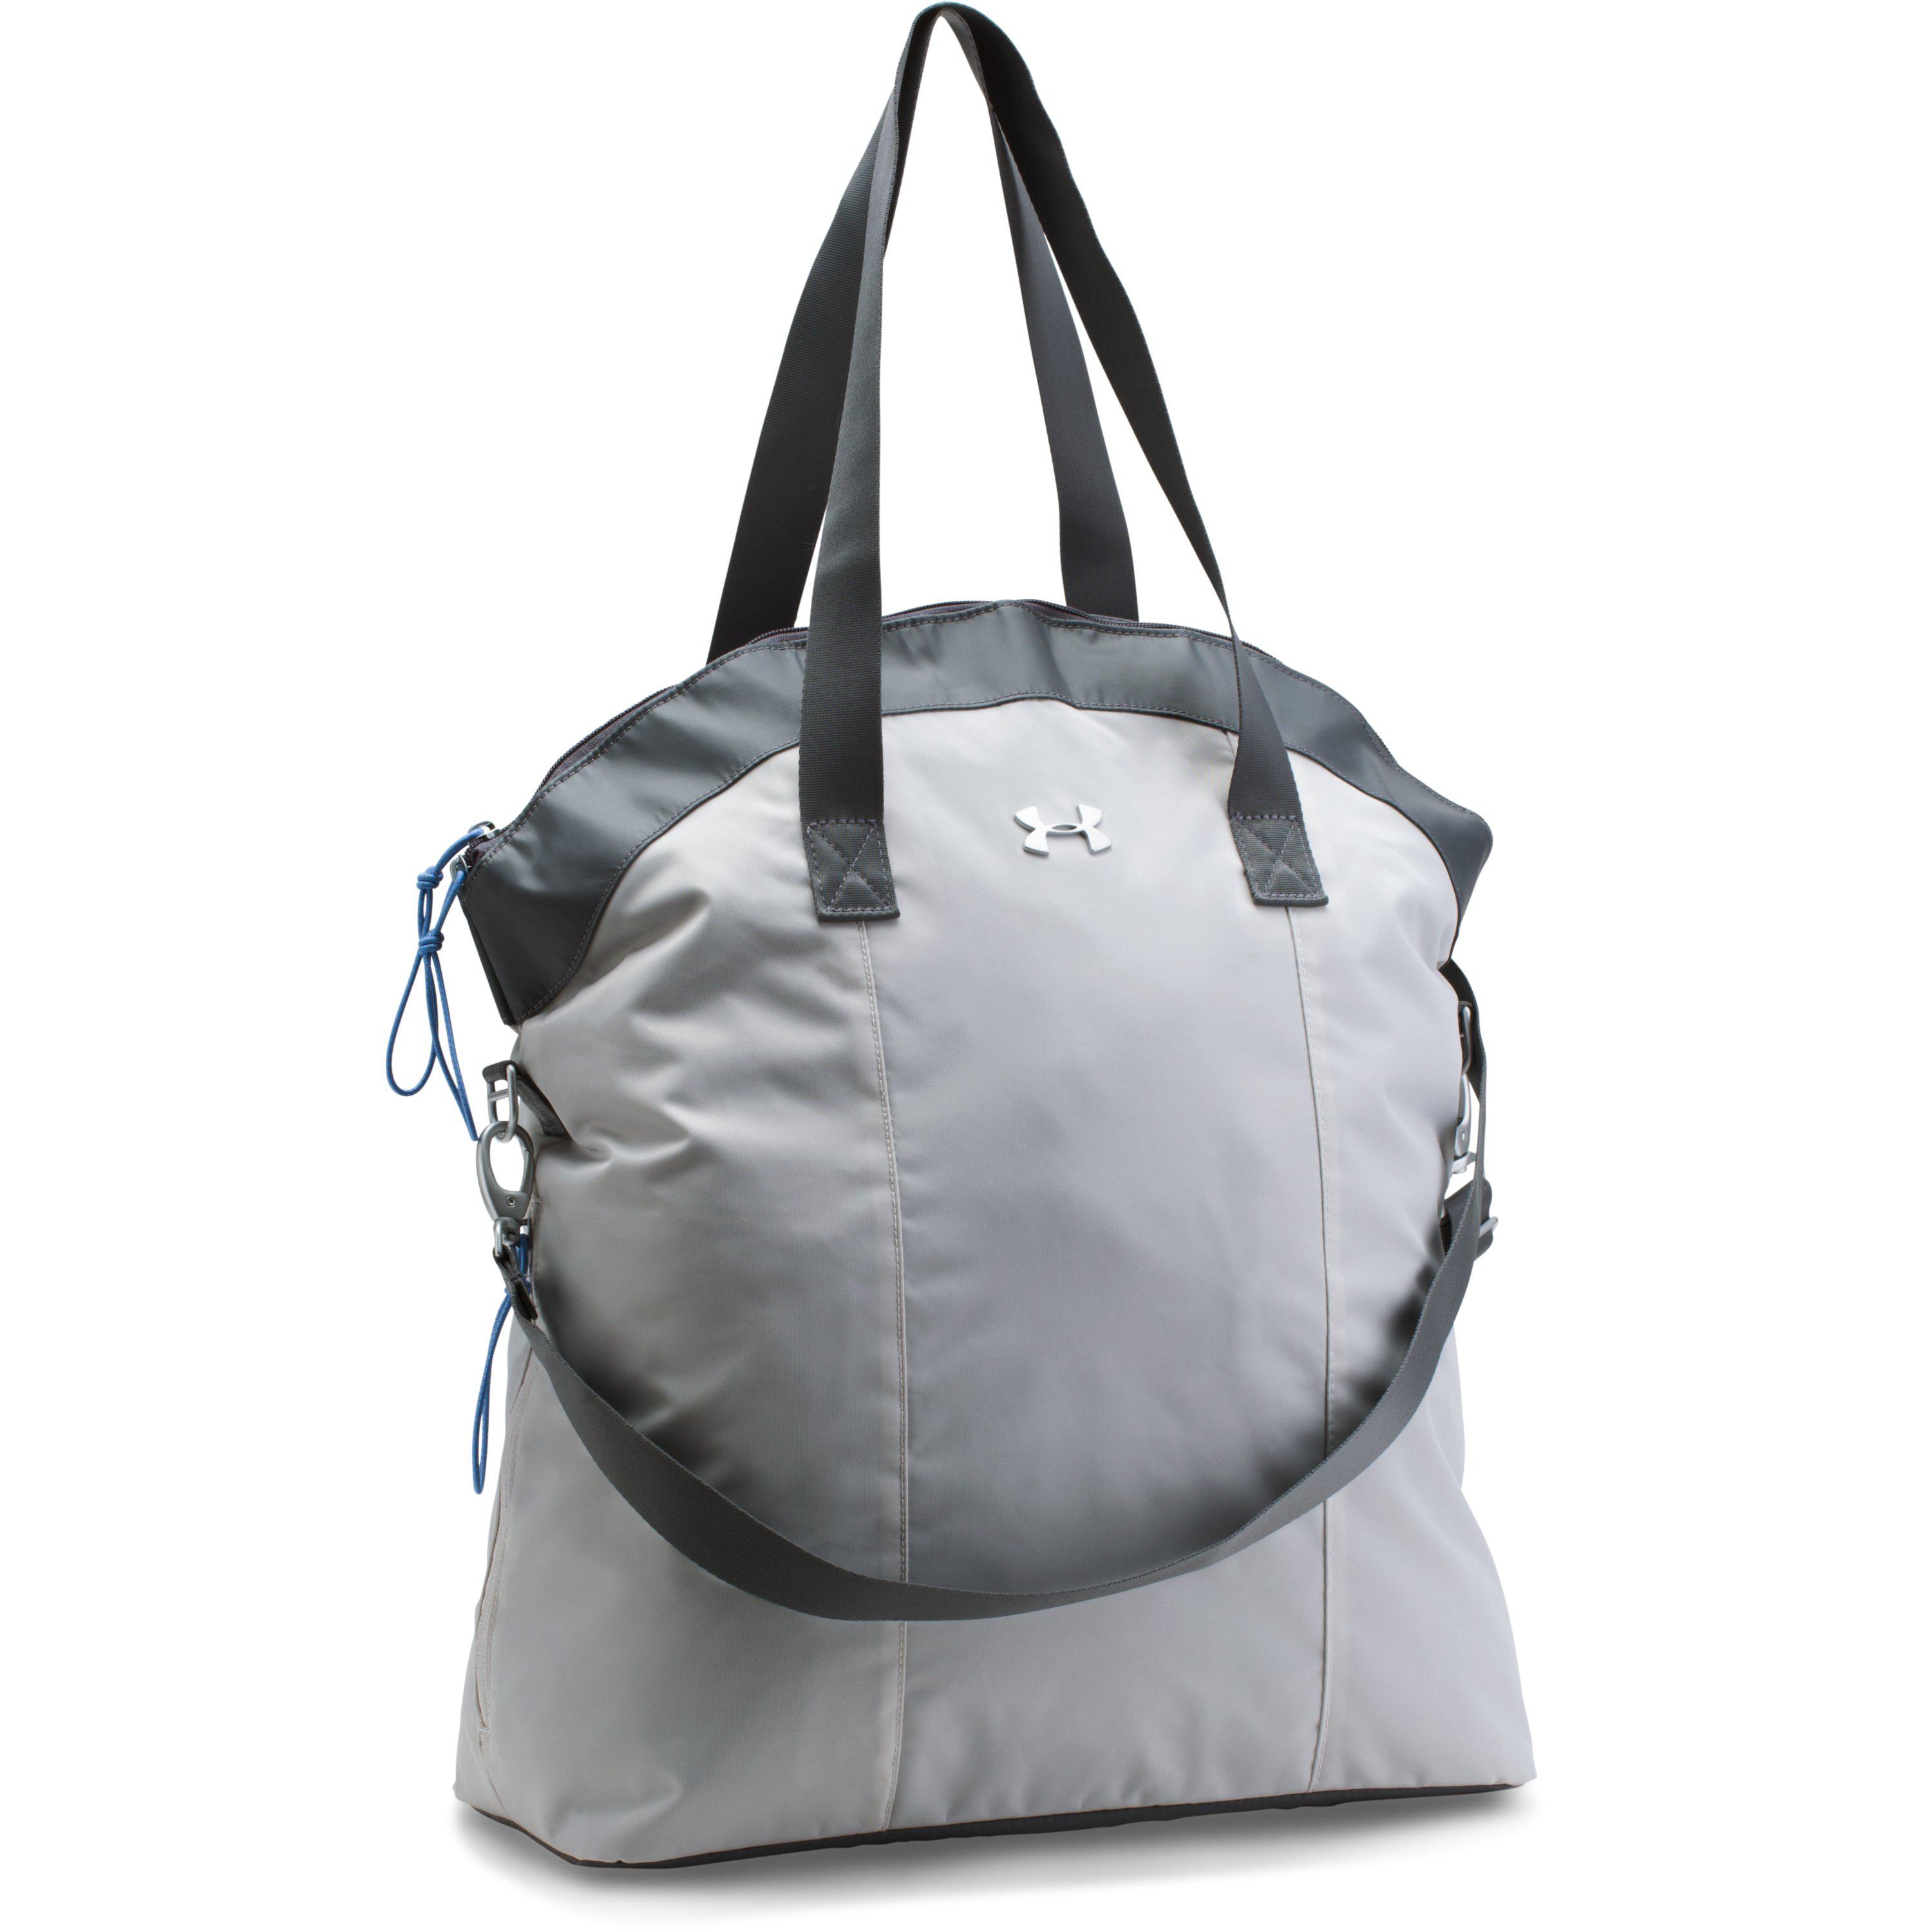 Under Armour Synthetic Reflect Tote in 